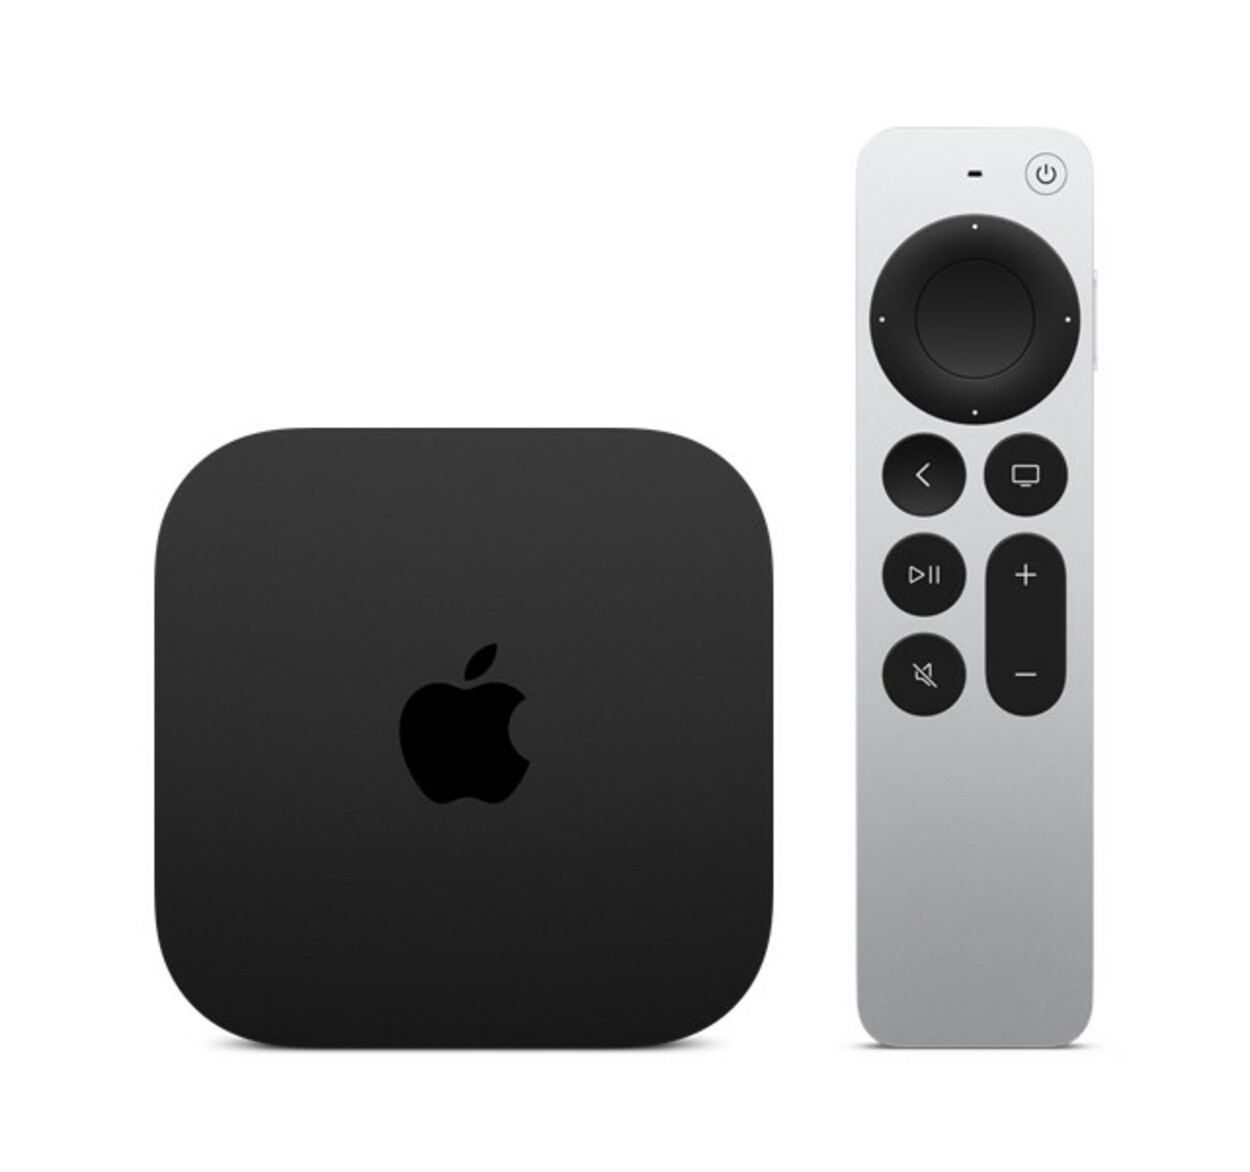 Apple TV device and remote